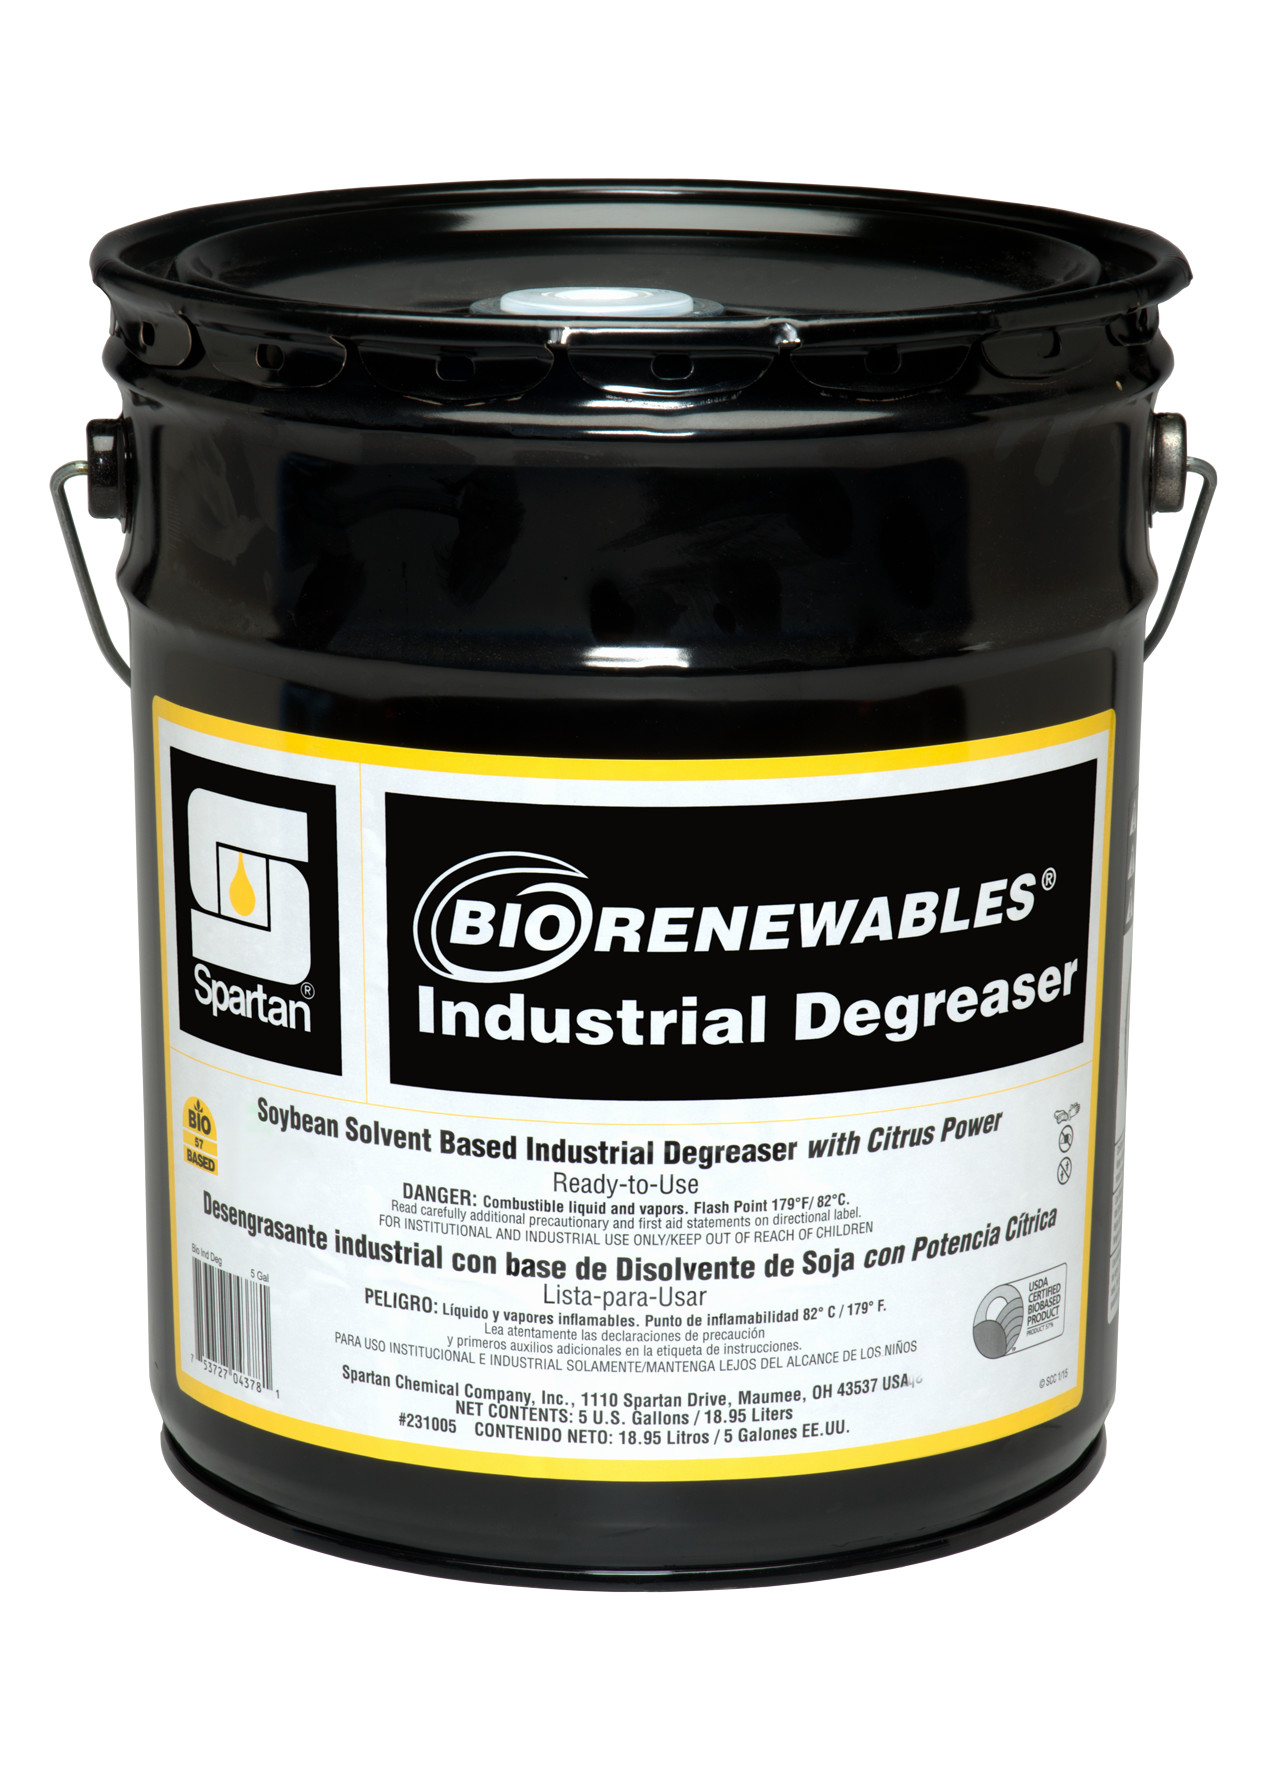 Spartan Chemical Company BioRenewables Industrial Degreaser, 5 GAL PAIL